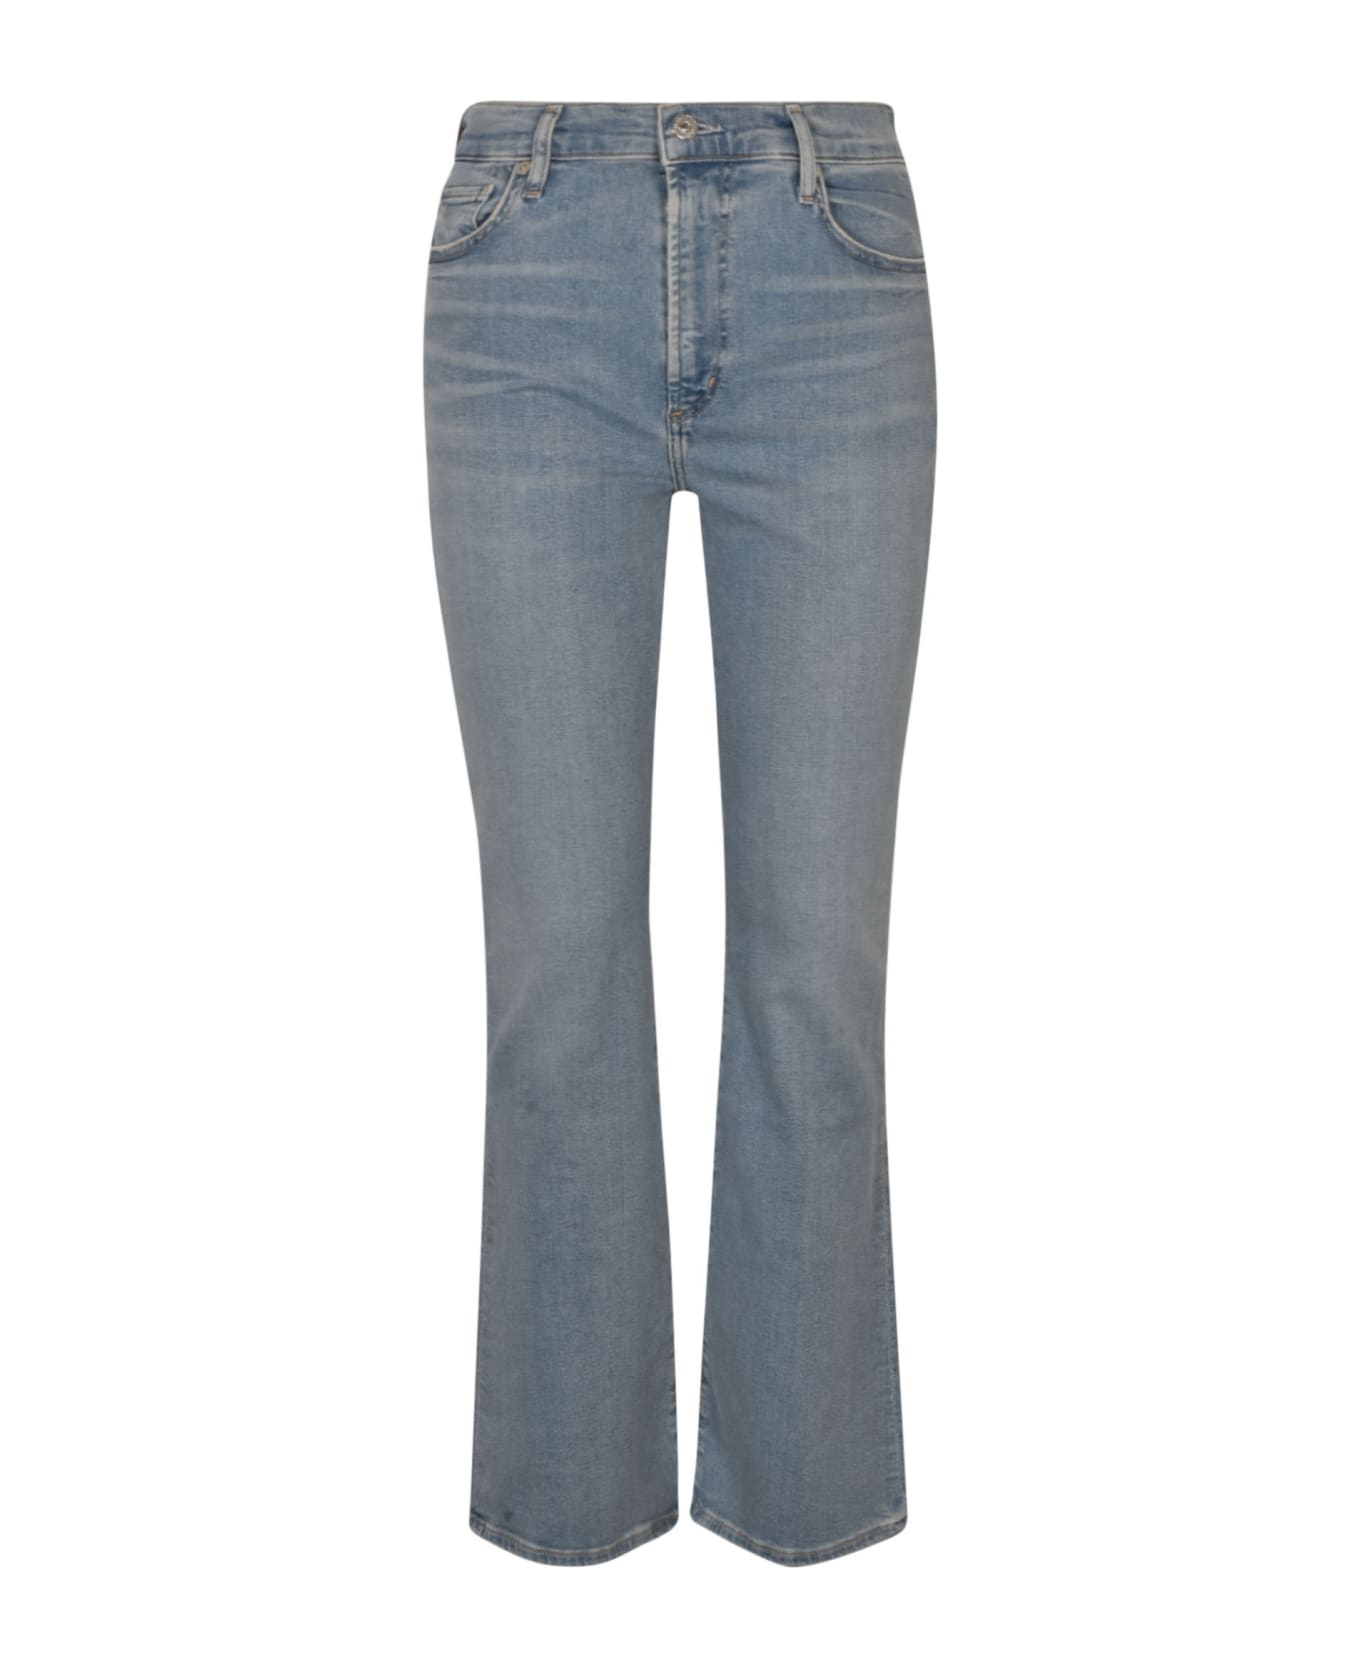 Citizens of Humanity Lilah High Rise Bootcut Jeans - LYRIC